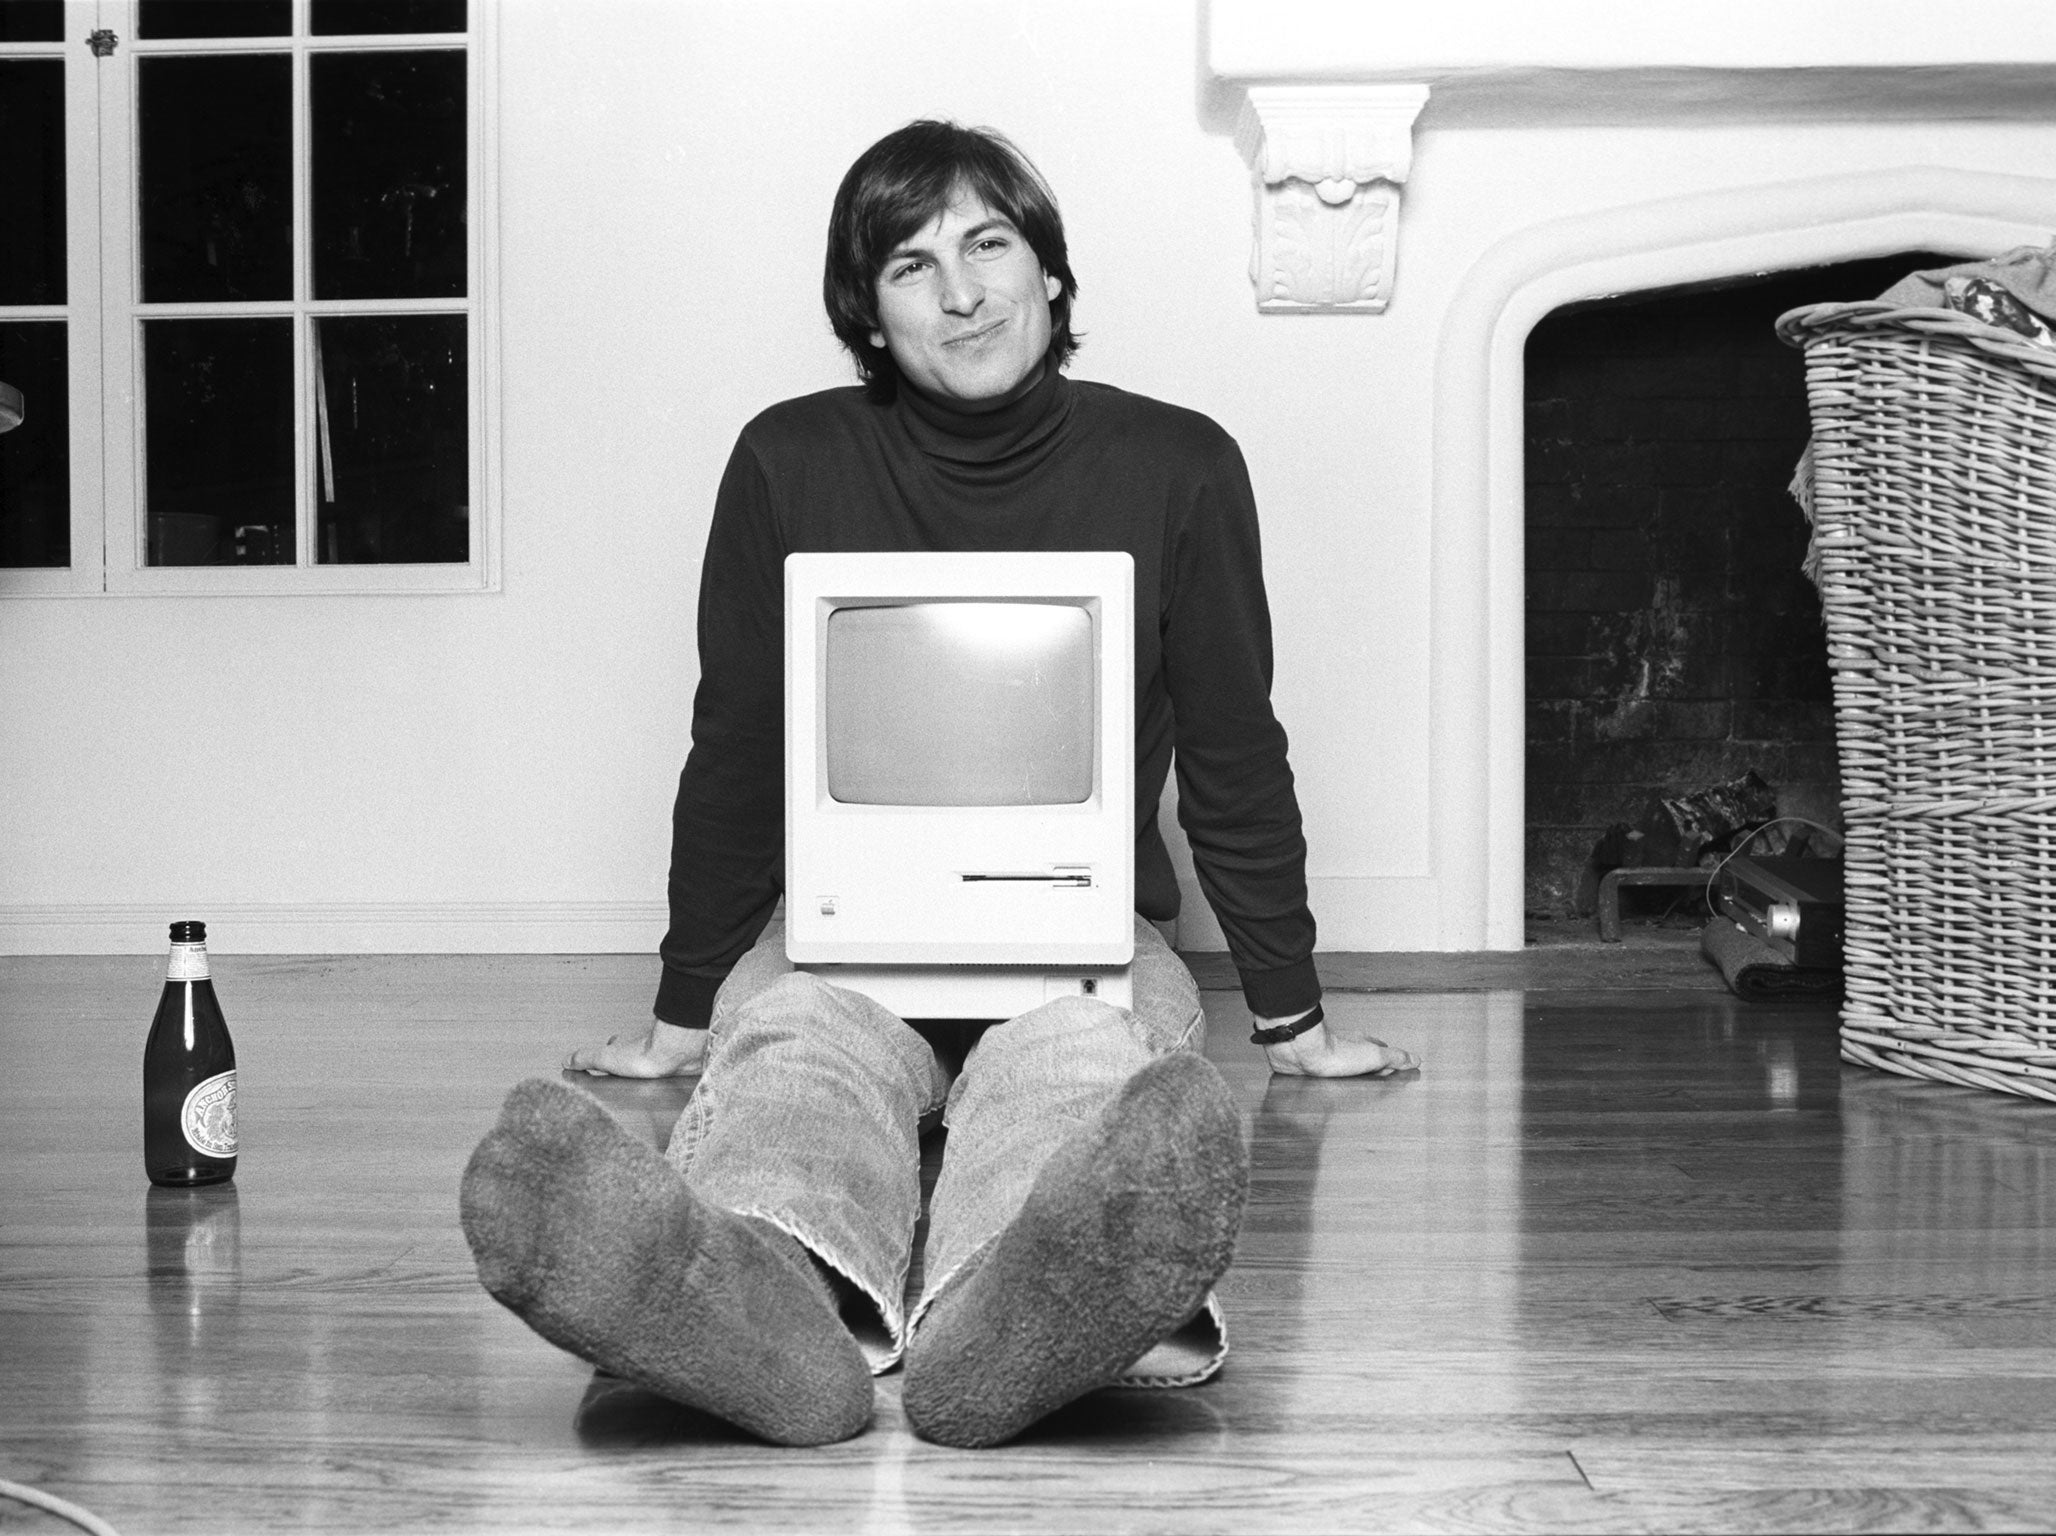 An early picture of Jobs, as featured in the Man in the Machine